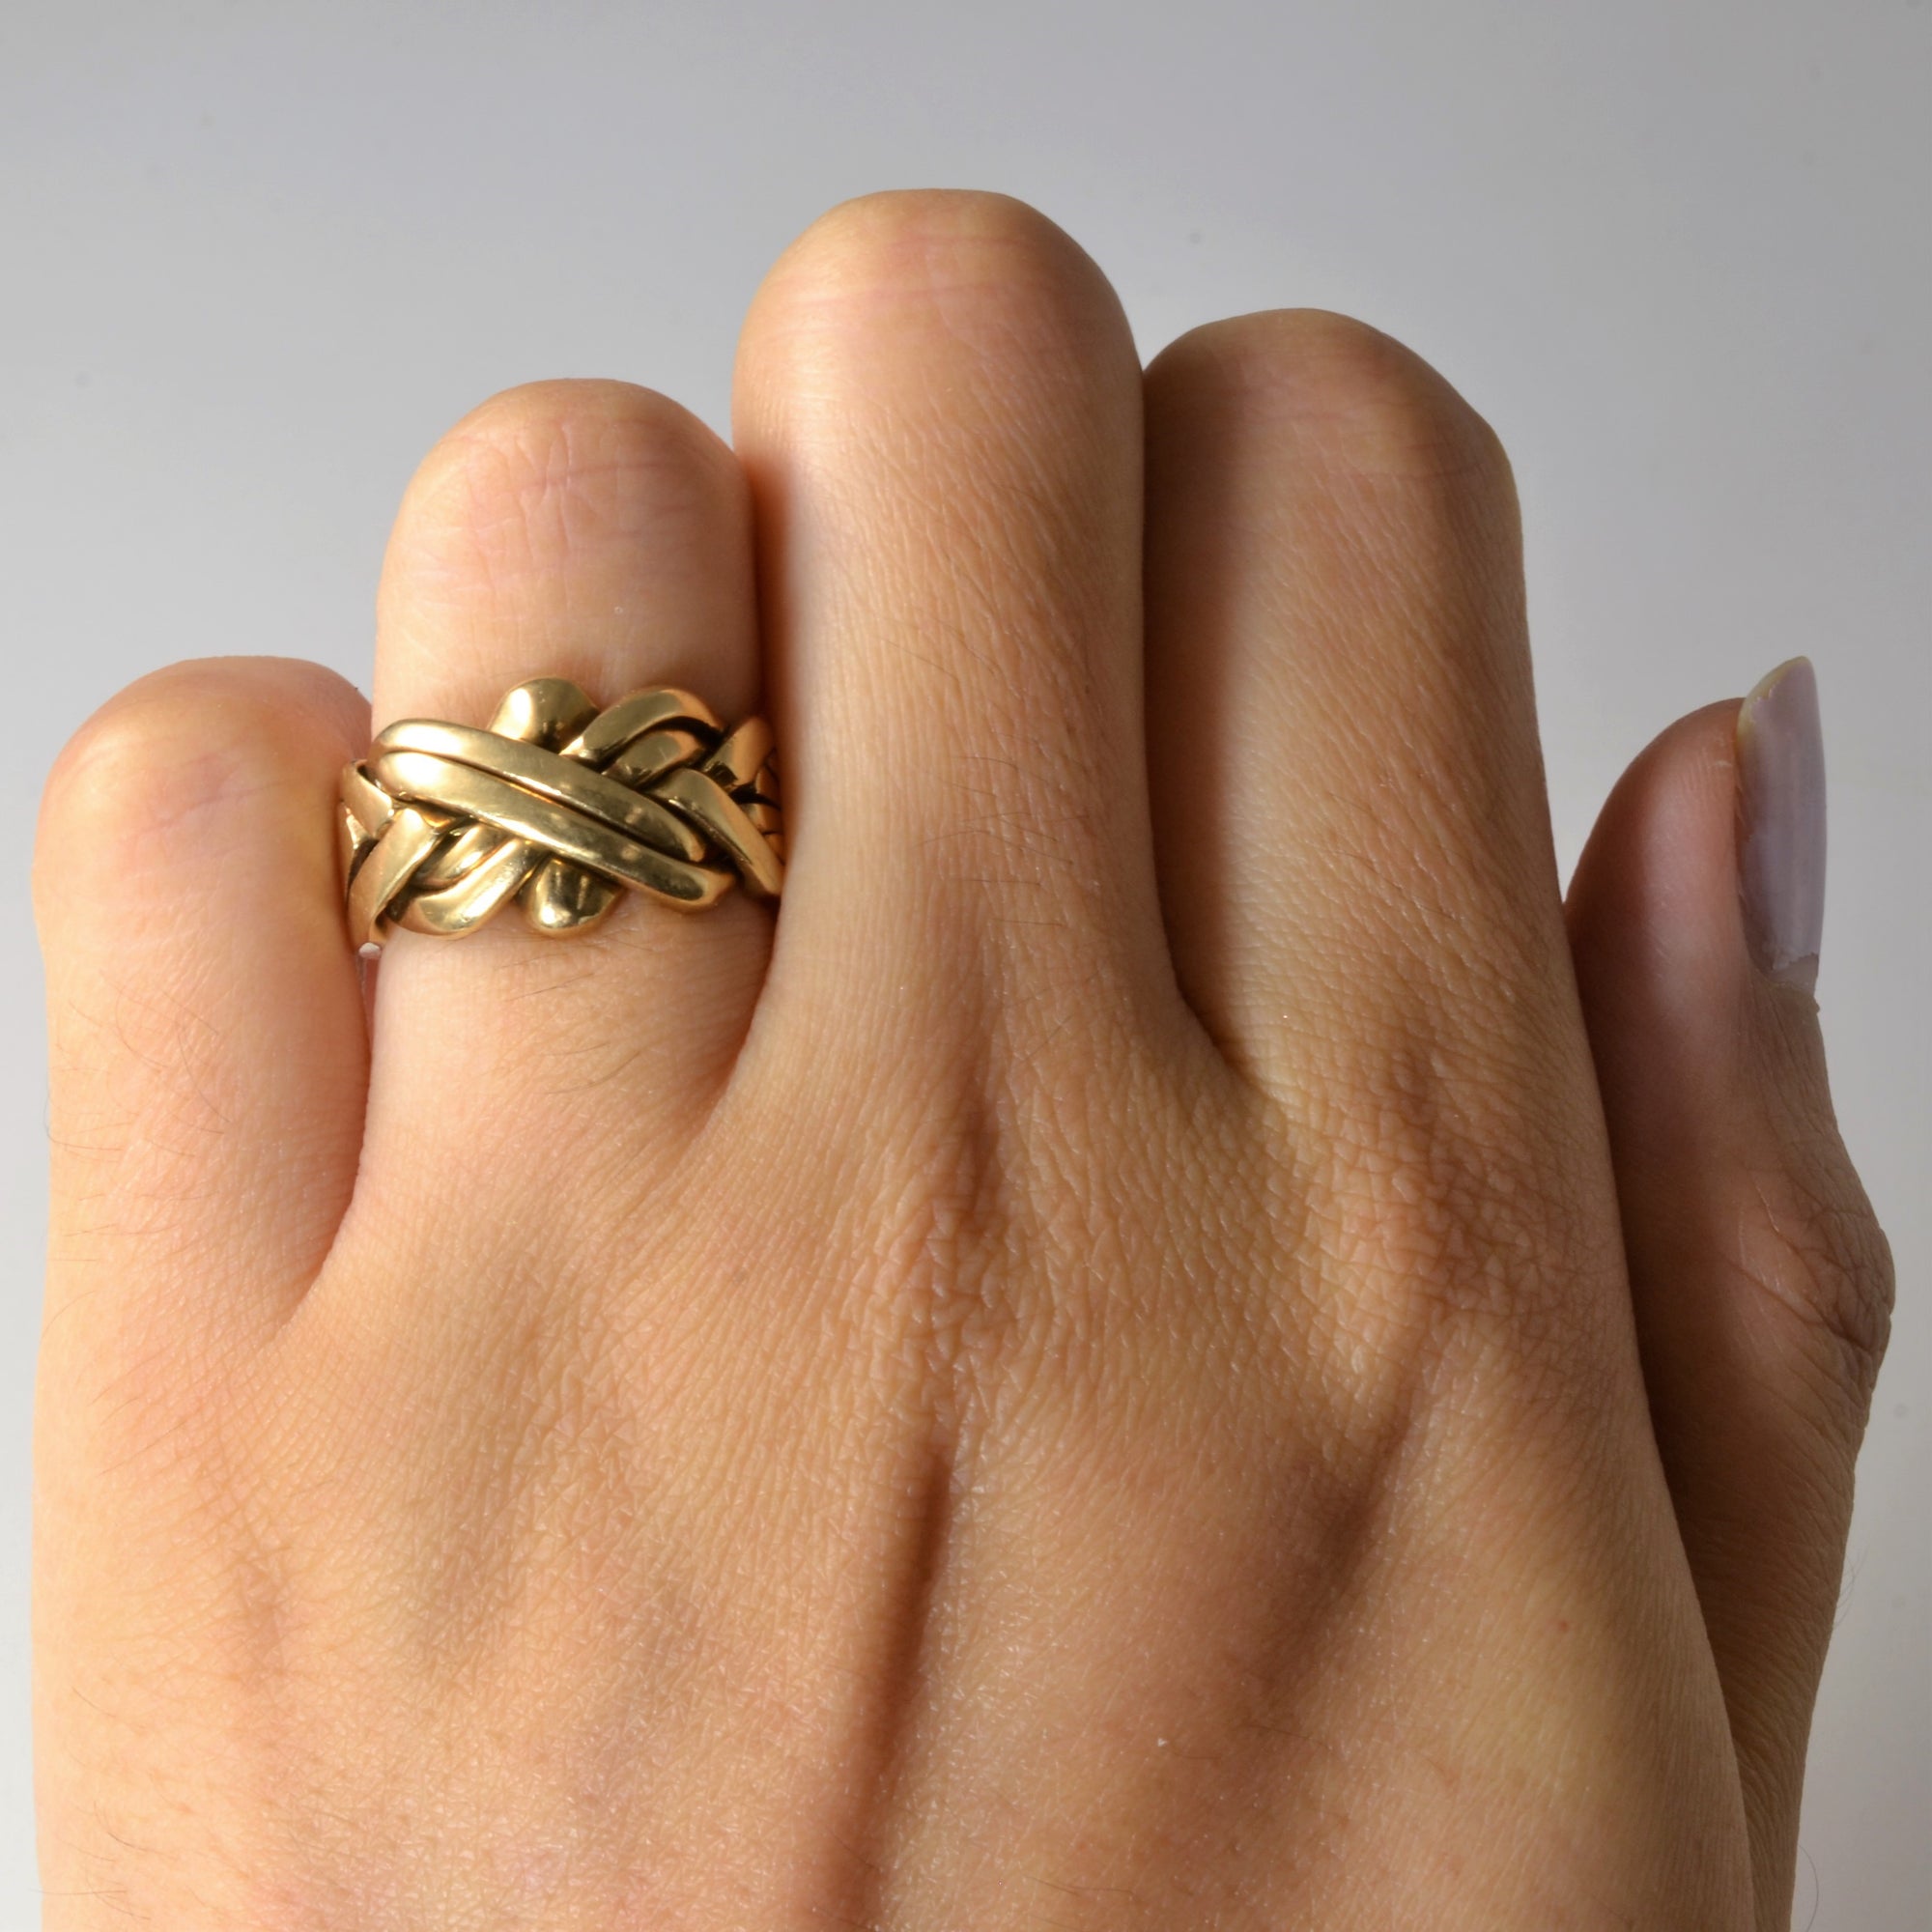 Yellow Gold Puzzle Ring | SZ 5.5 |